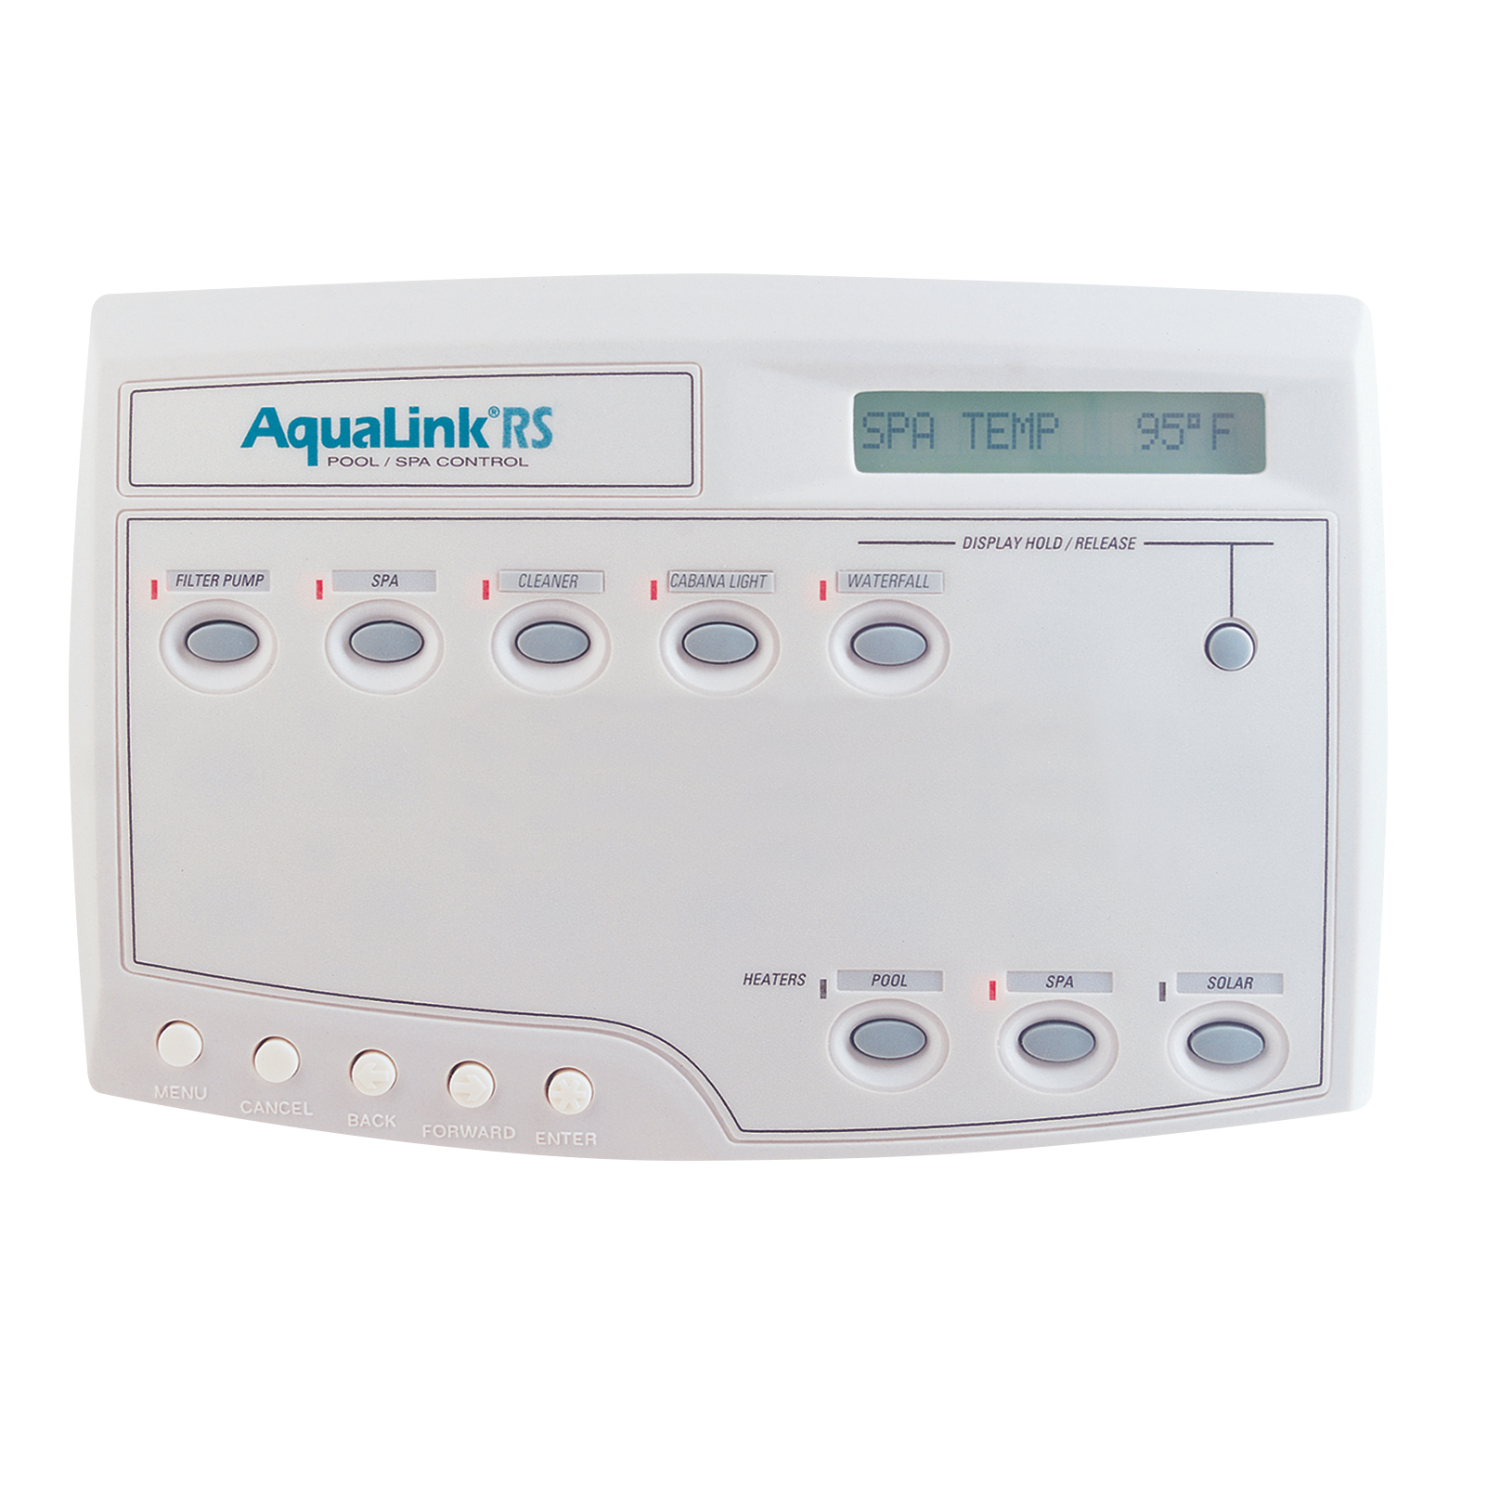 Jandy | AquaLink RS All Button Aqualink Rs6 Timeout Mode Is Active